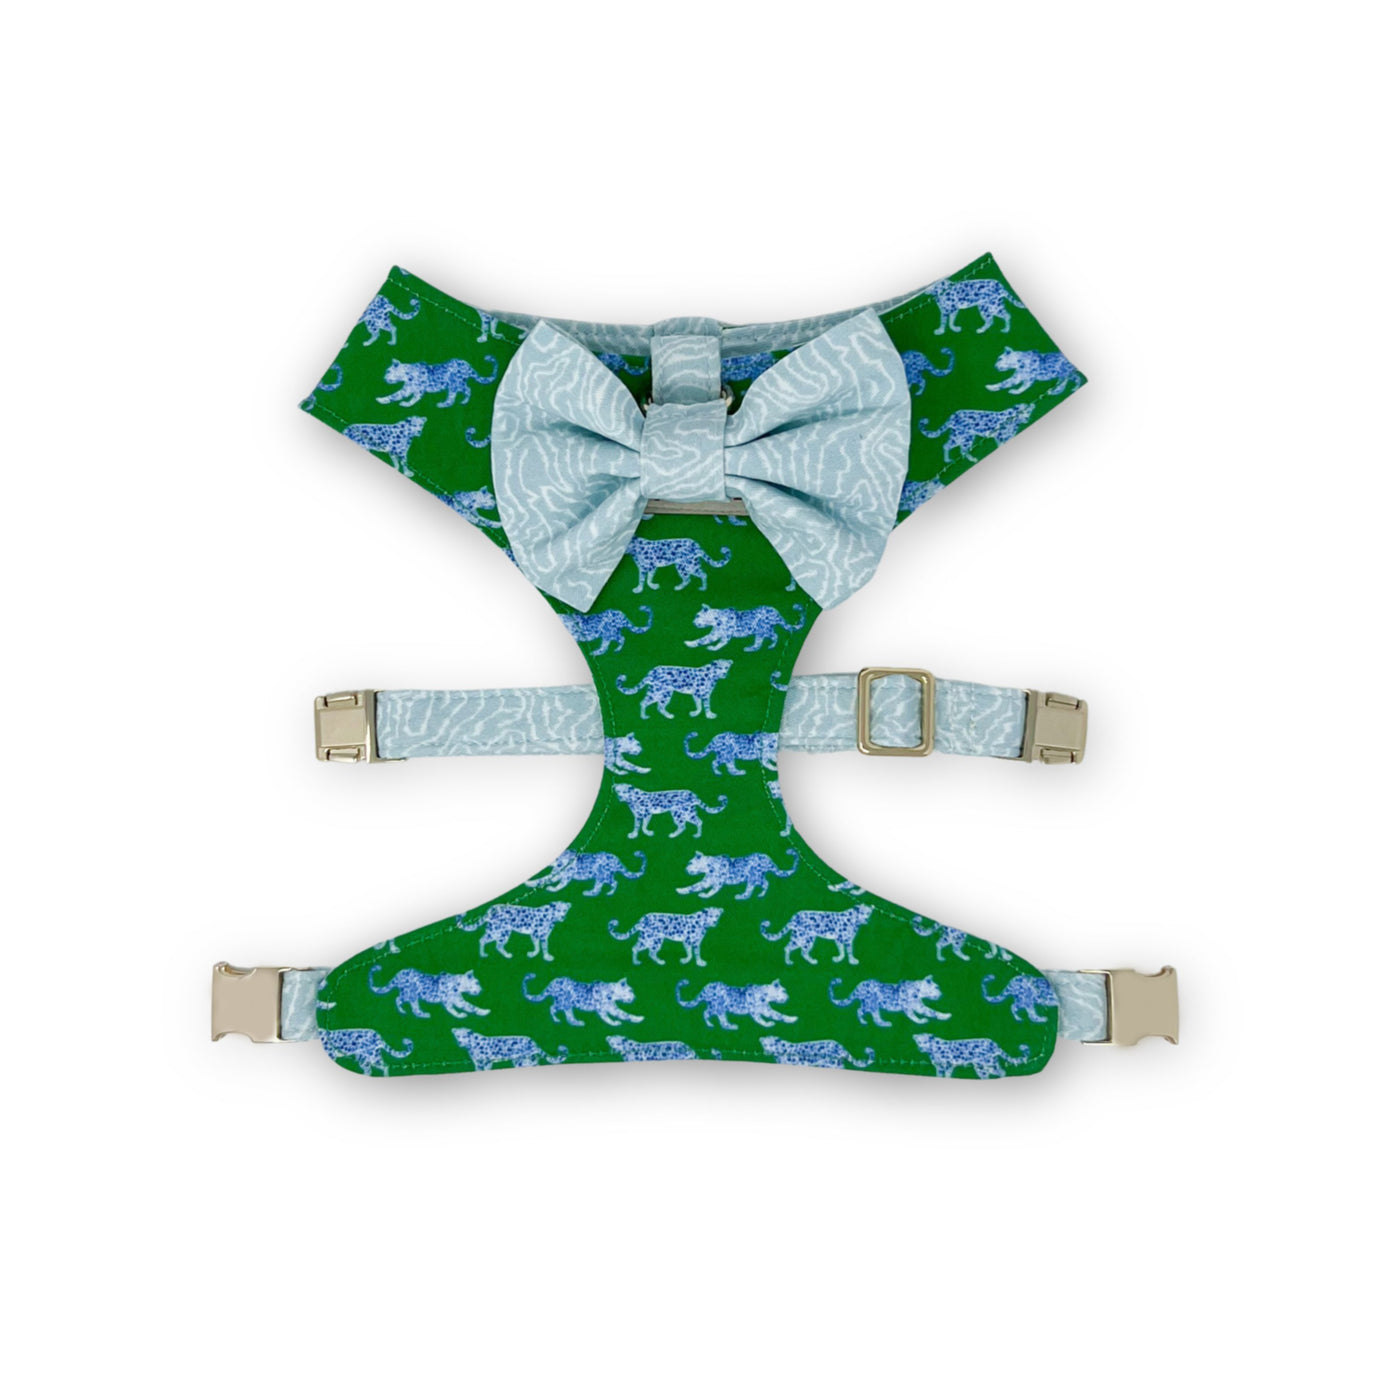 Leopard Parade Reversible Dog Harness + Endless Path Bow Tie